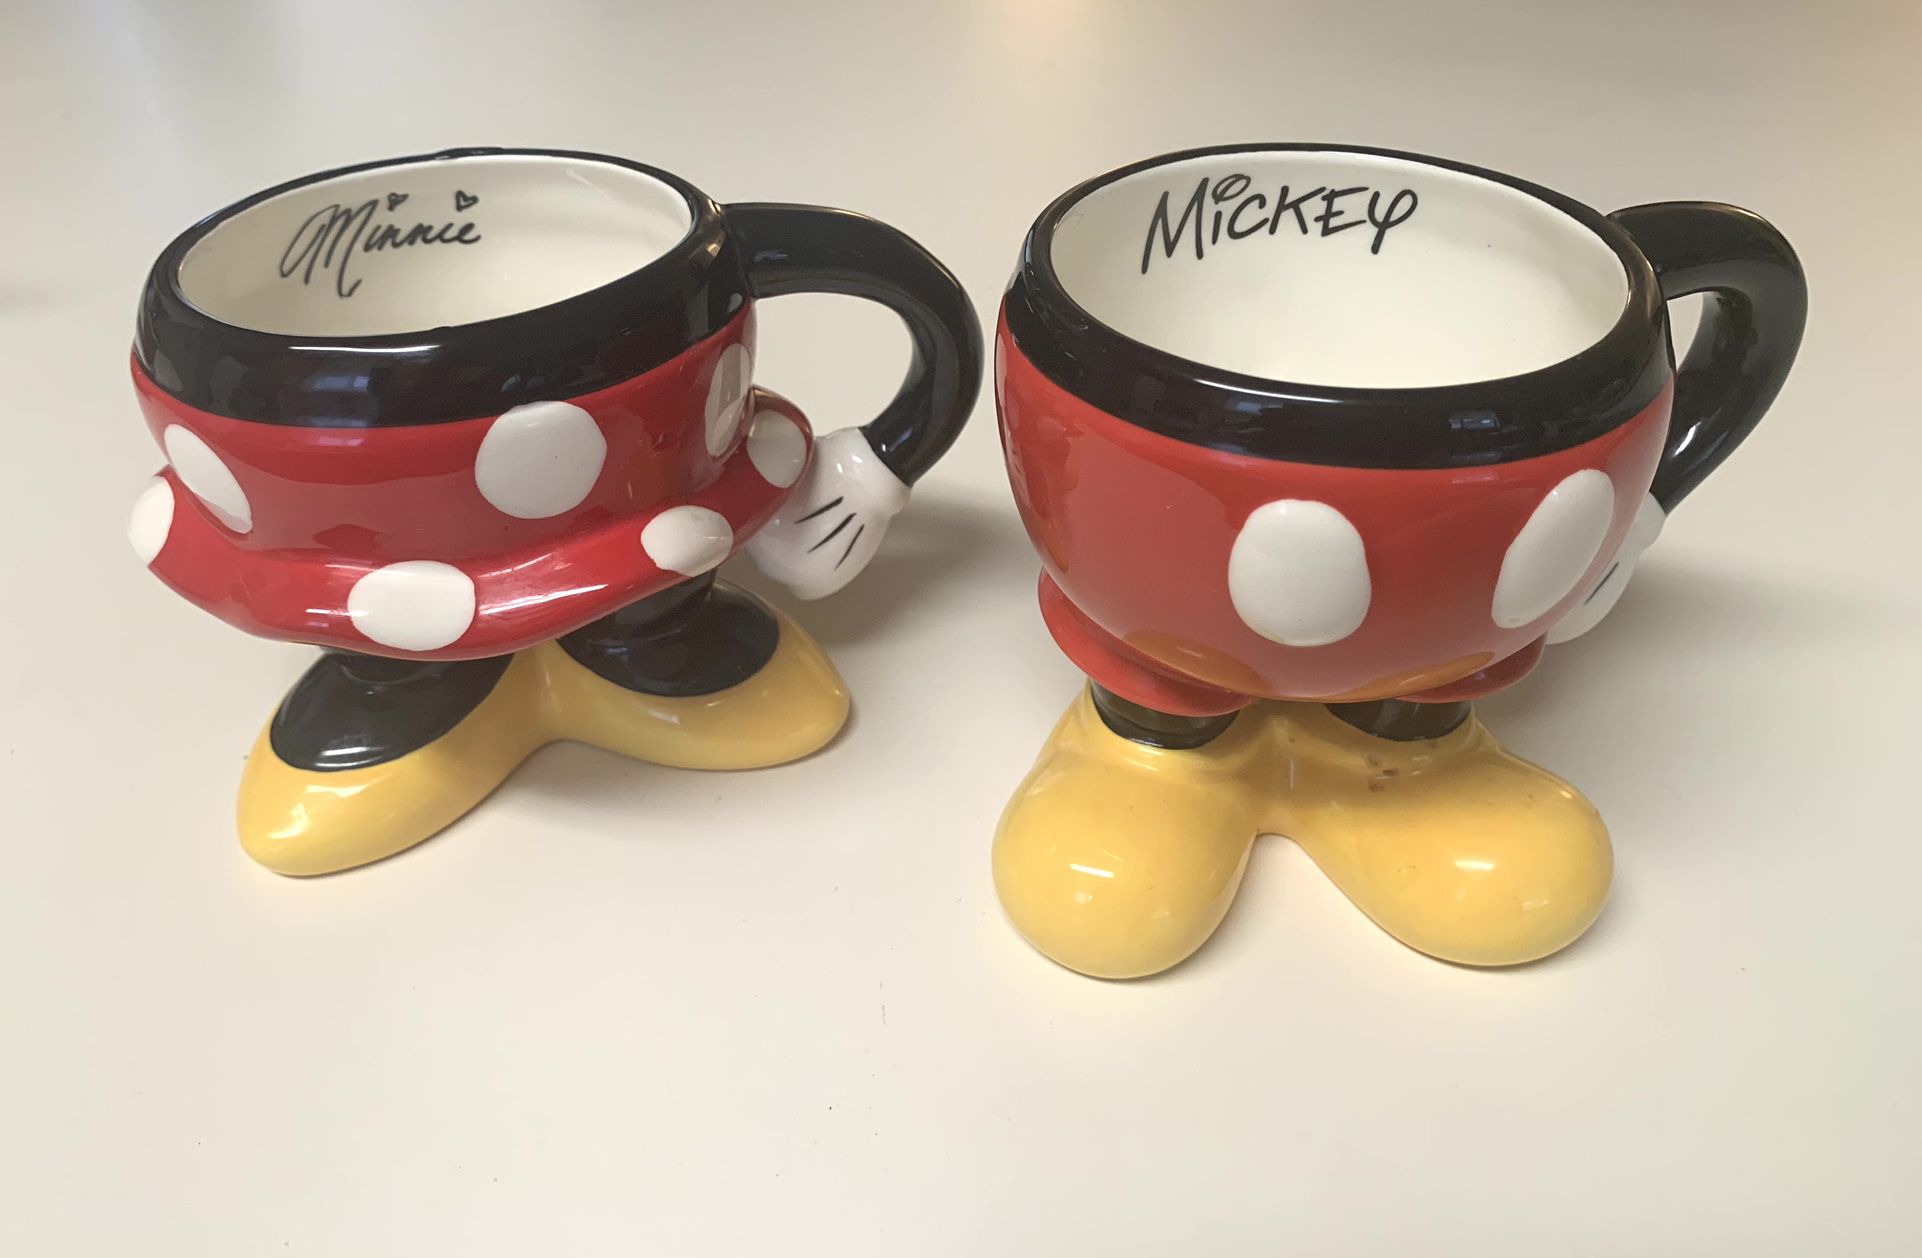 Disney Parks Mickey and Minnie Mouse Pants Bottom Legs Coffee Mugs Set of 2